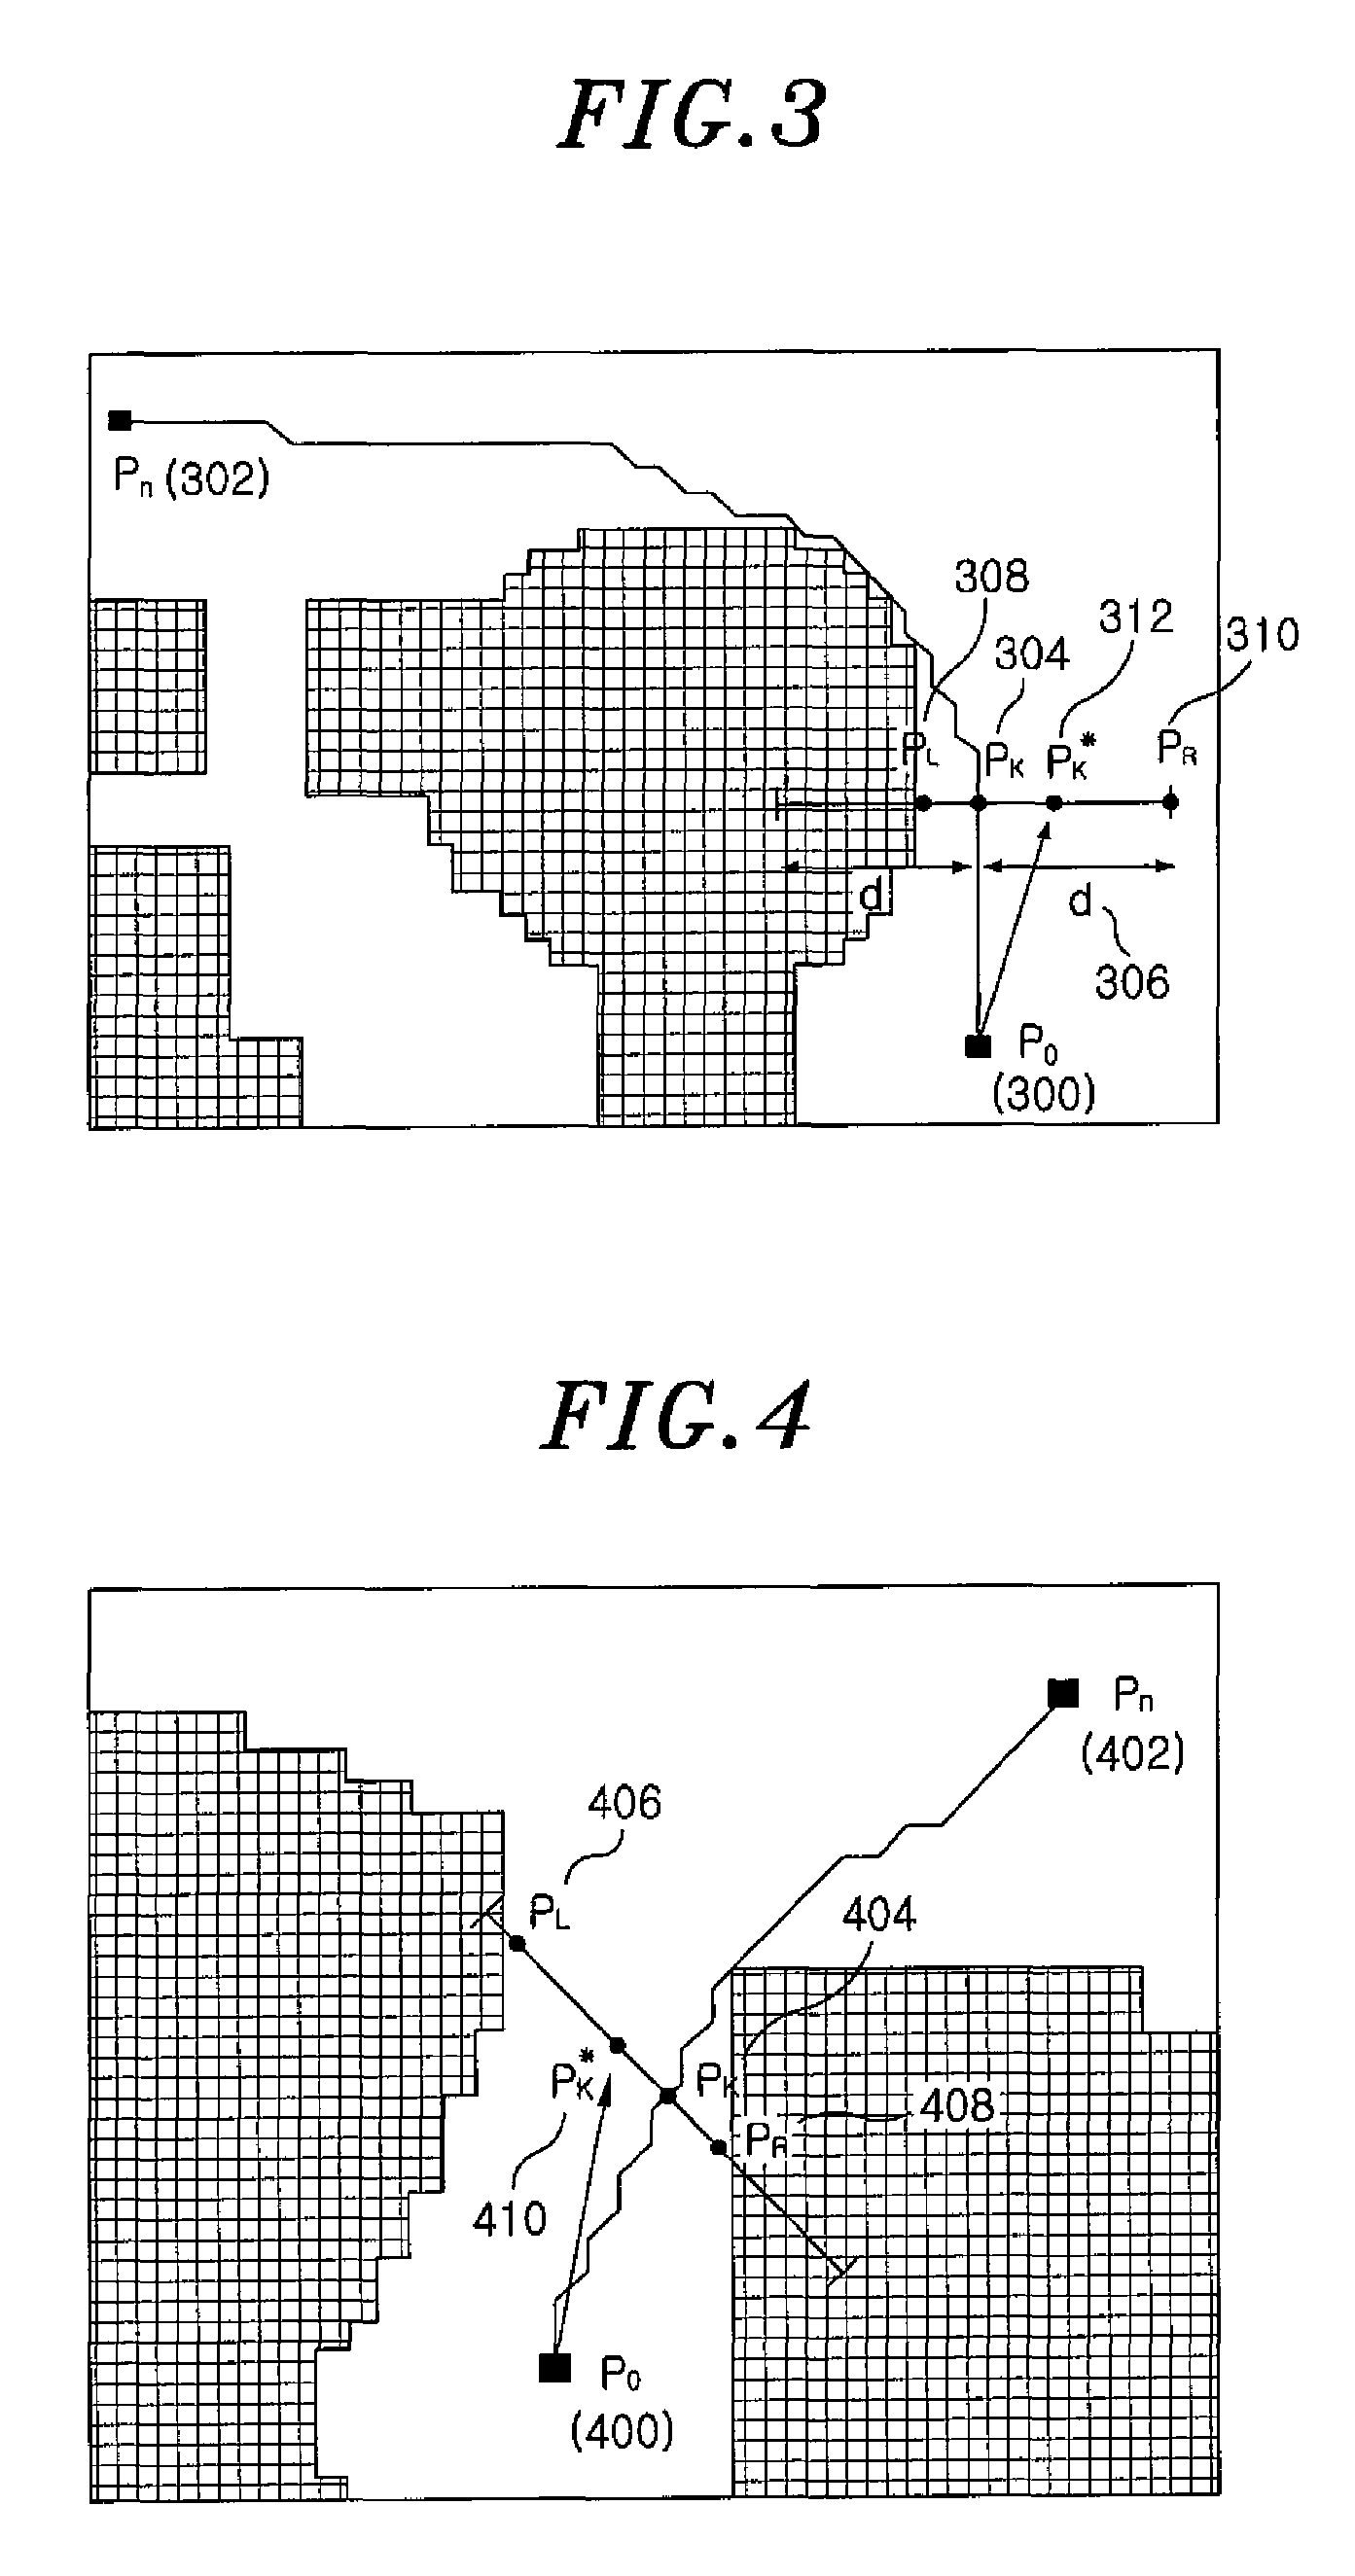 Method and apparatus for generating safe path of mobile robot